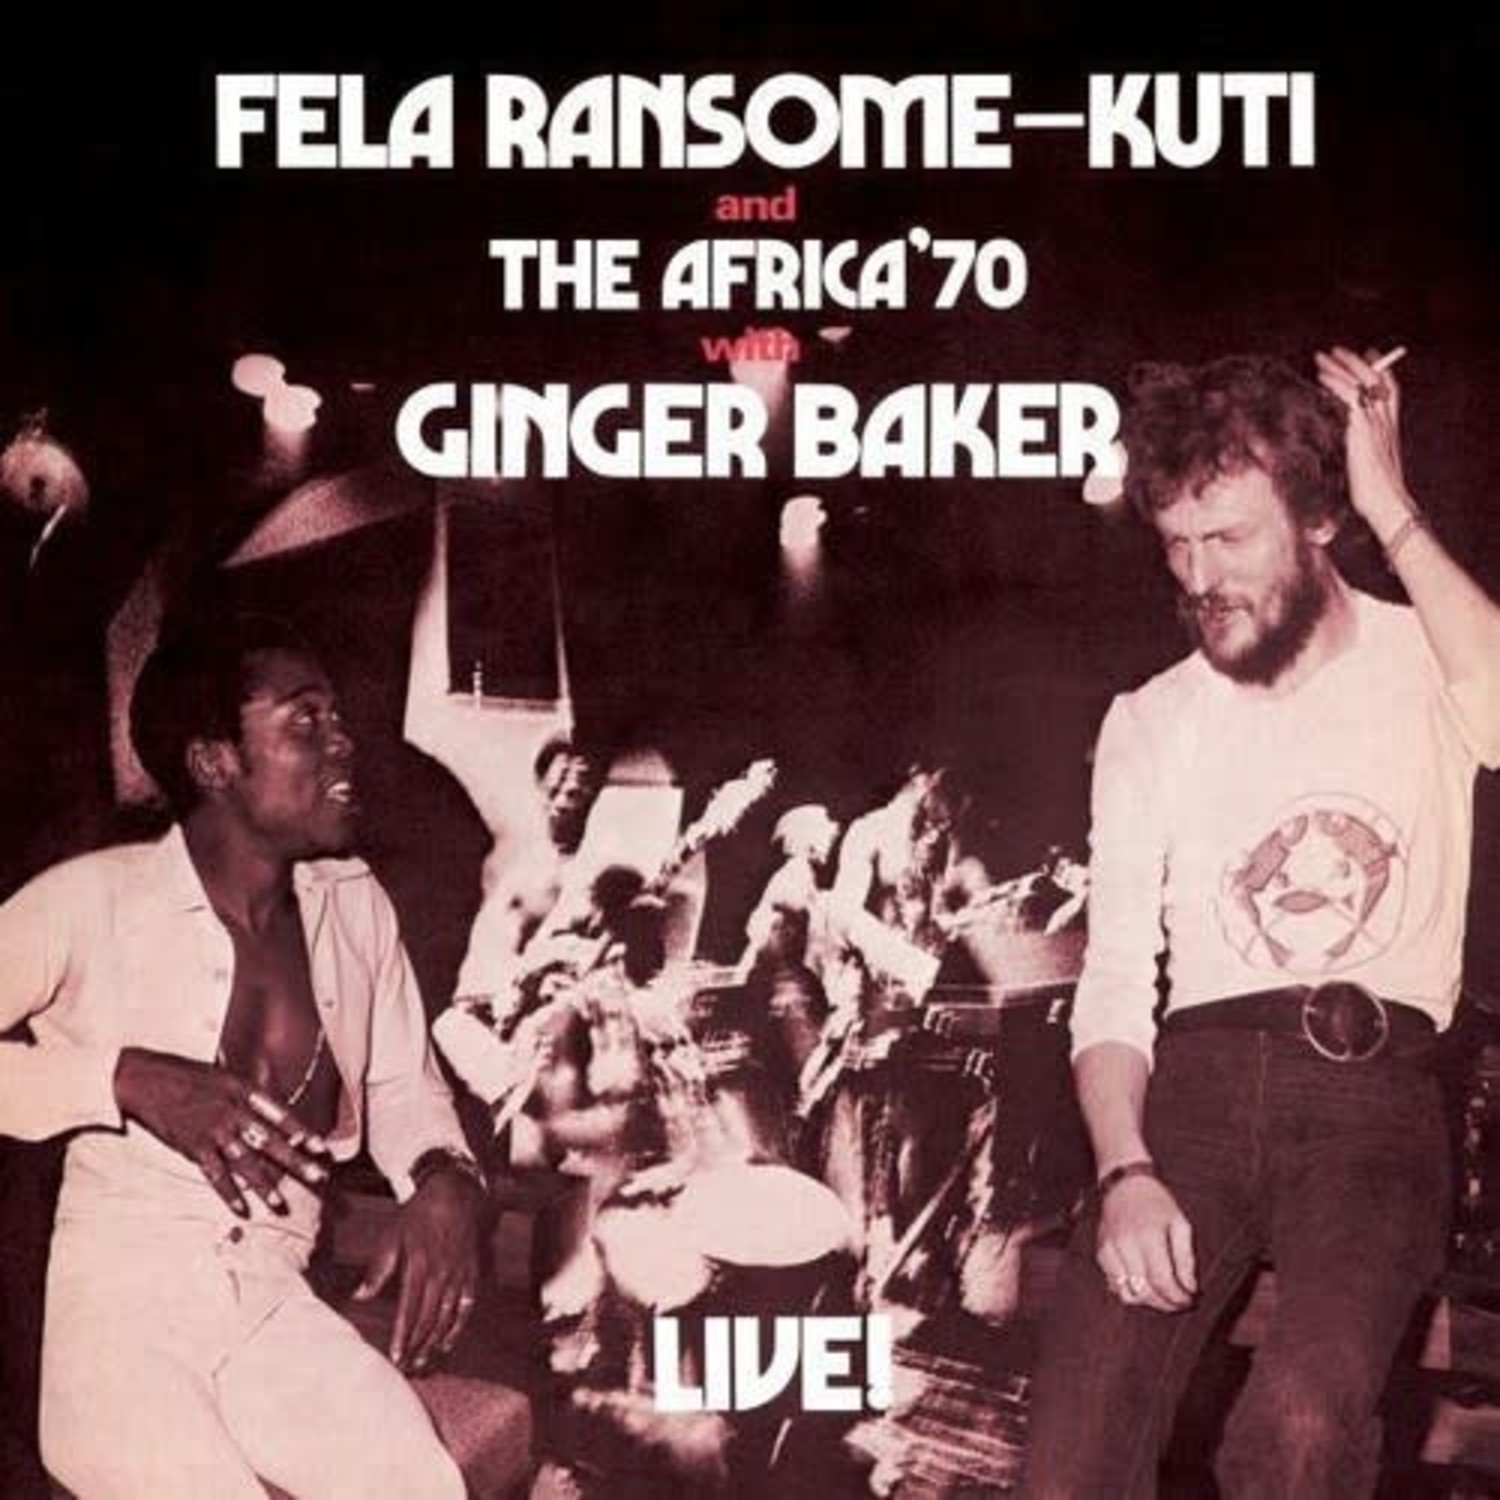 Kuti, Fela - Fela With Ginger Baker 2LP (Red Vinyl w/Etching on D-Side) - Wax Trax Records